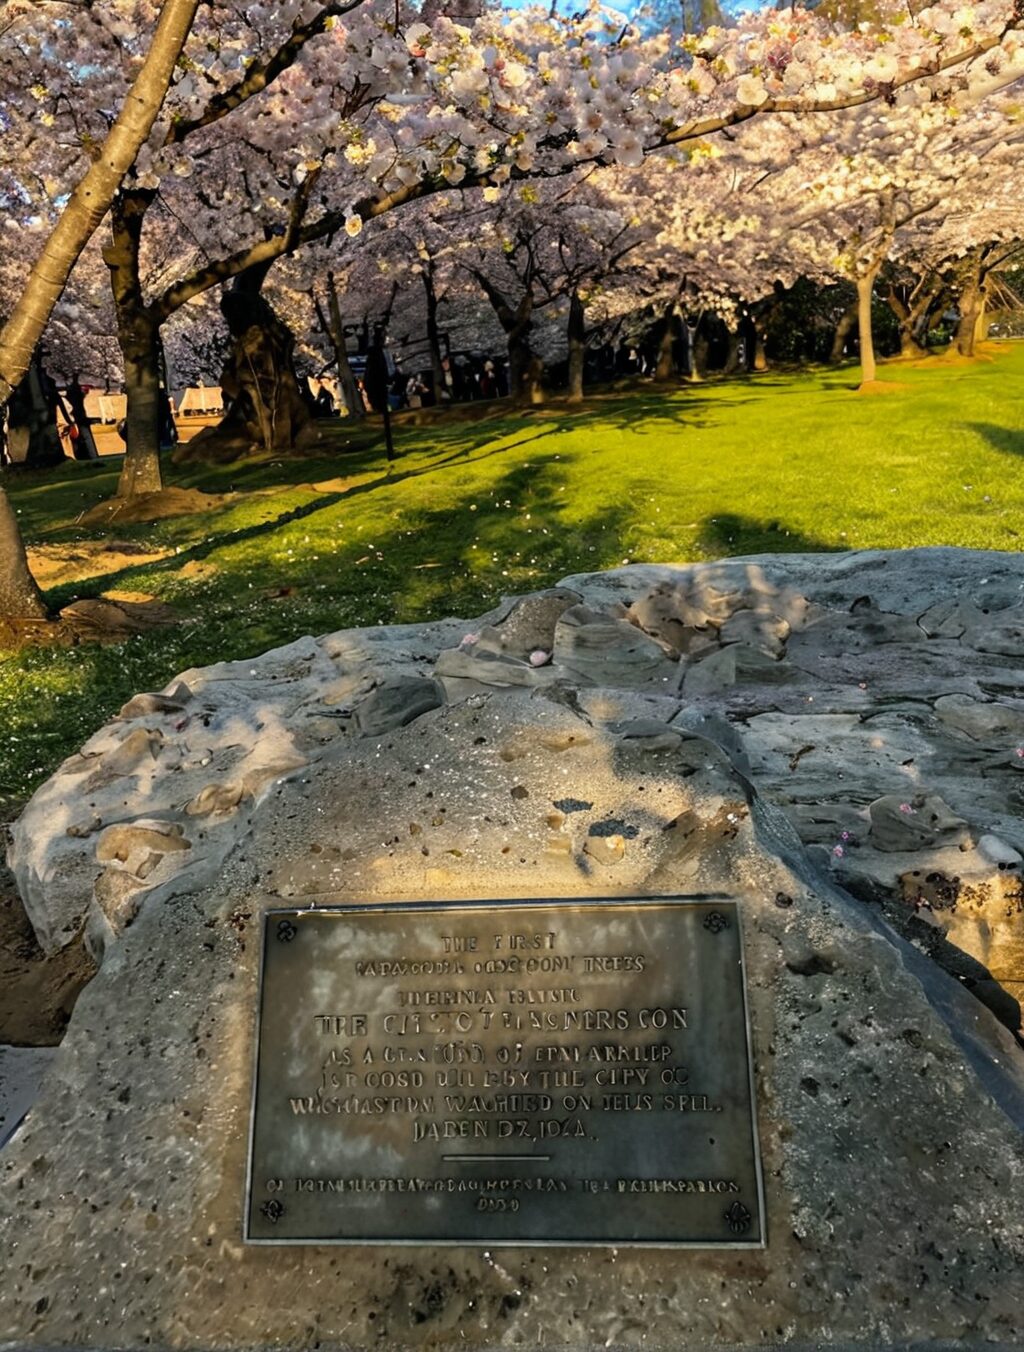 the first cherry blossom trees a gift from japan are planted in washington d.c